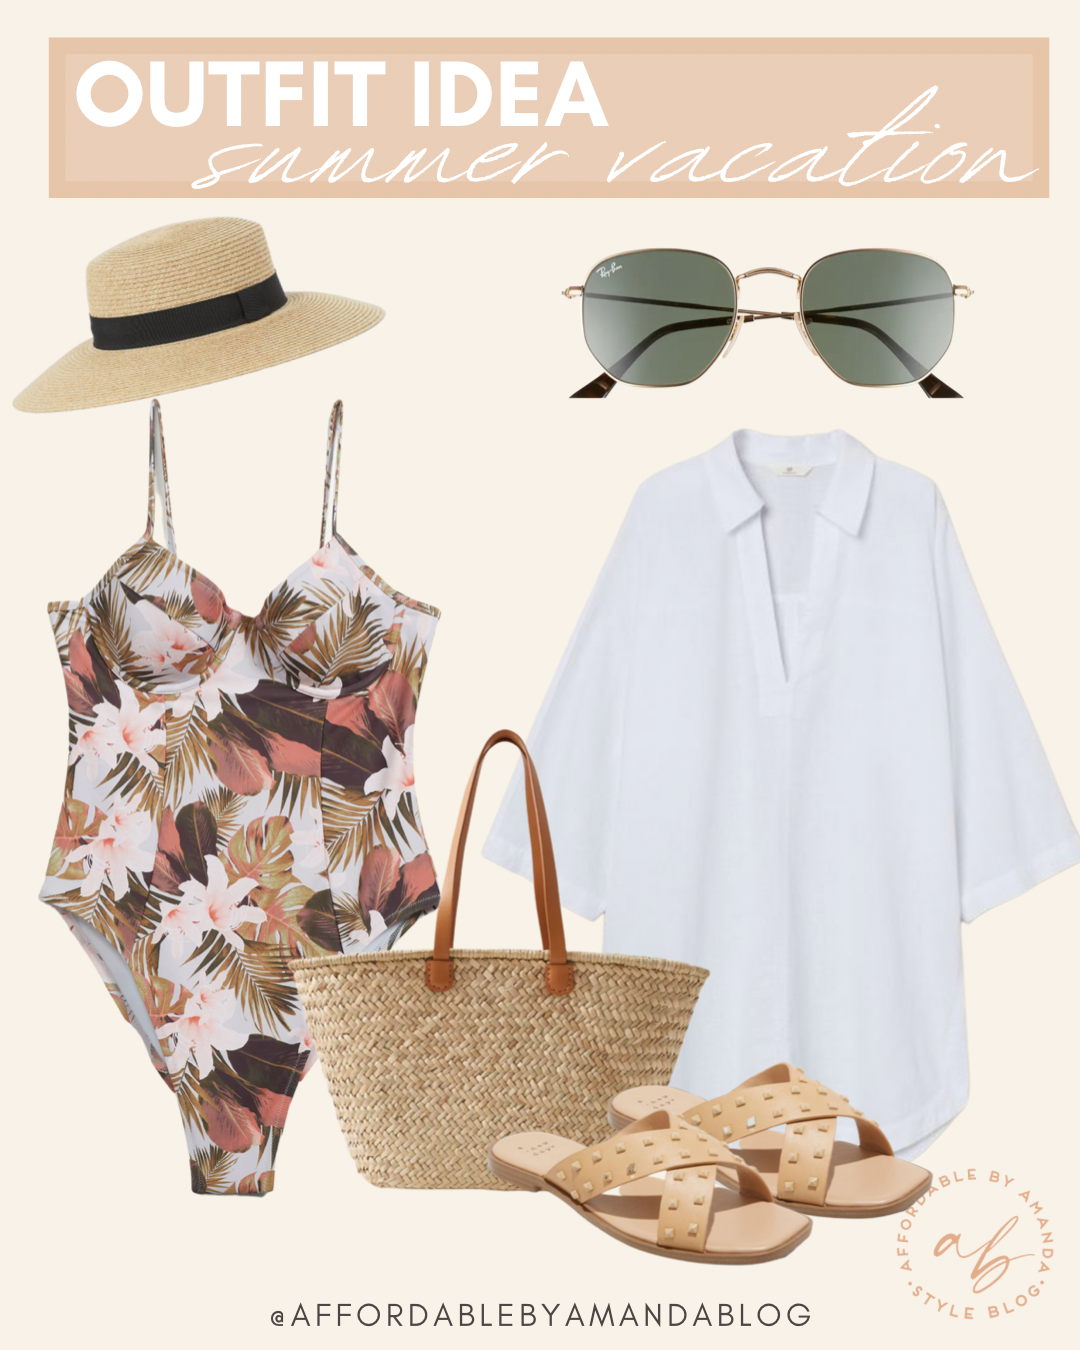 21 Cute and Trendy Summer Vacation Outfits for 2021 | Affordable by Amanda